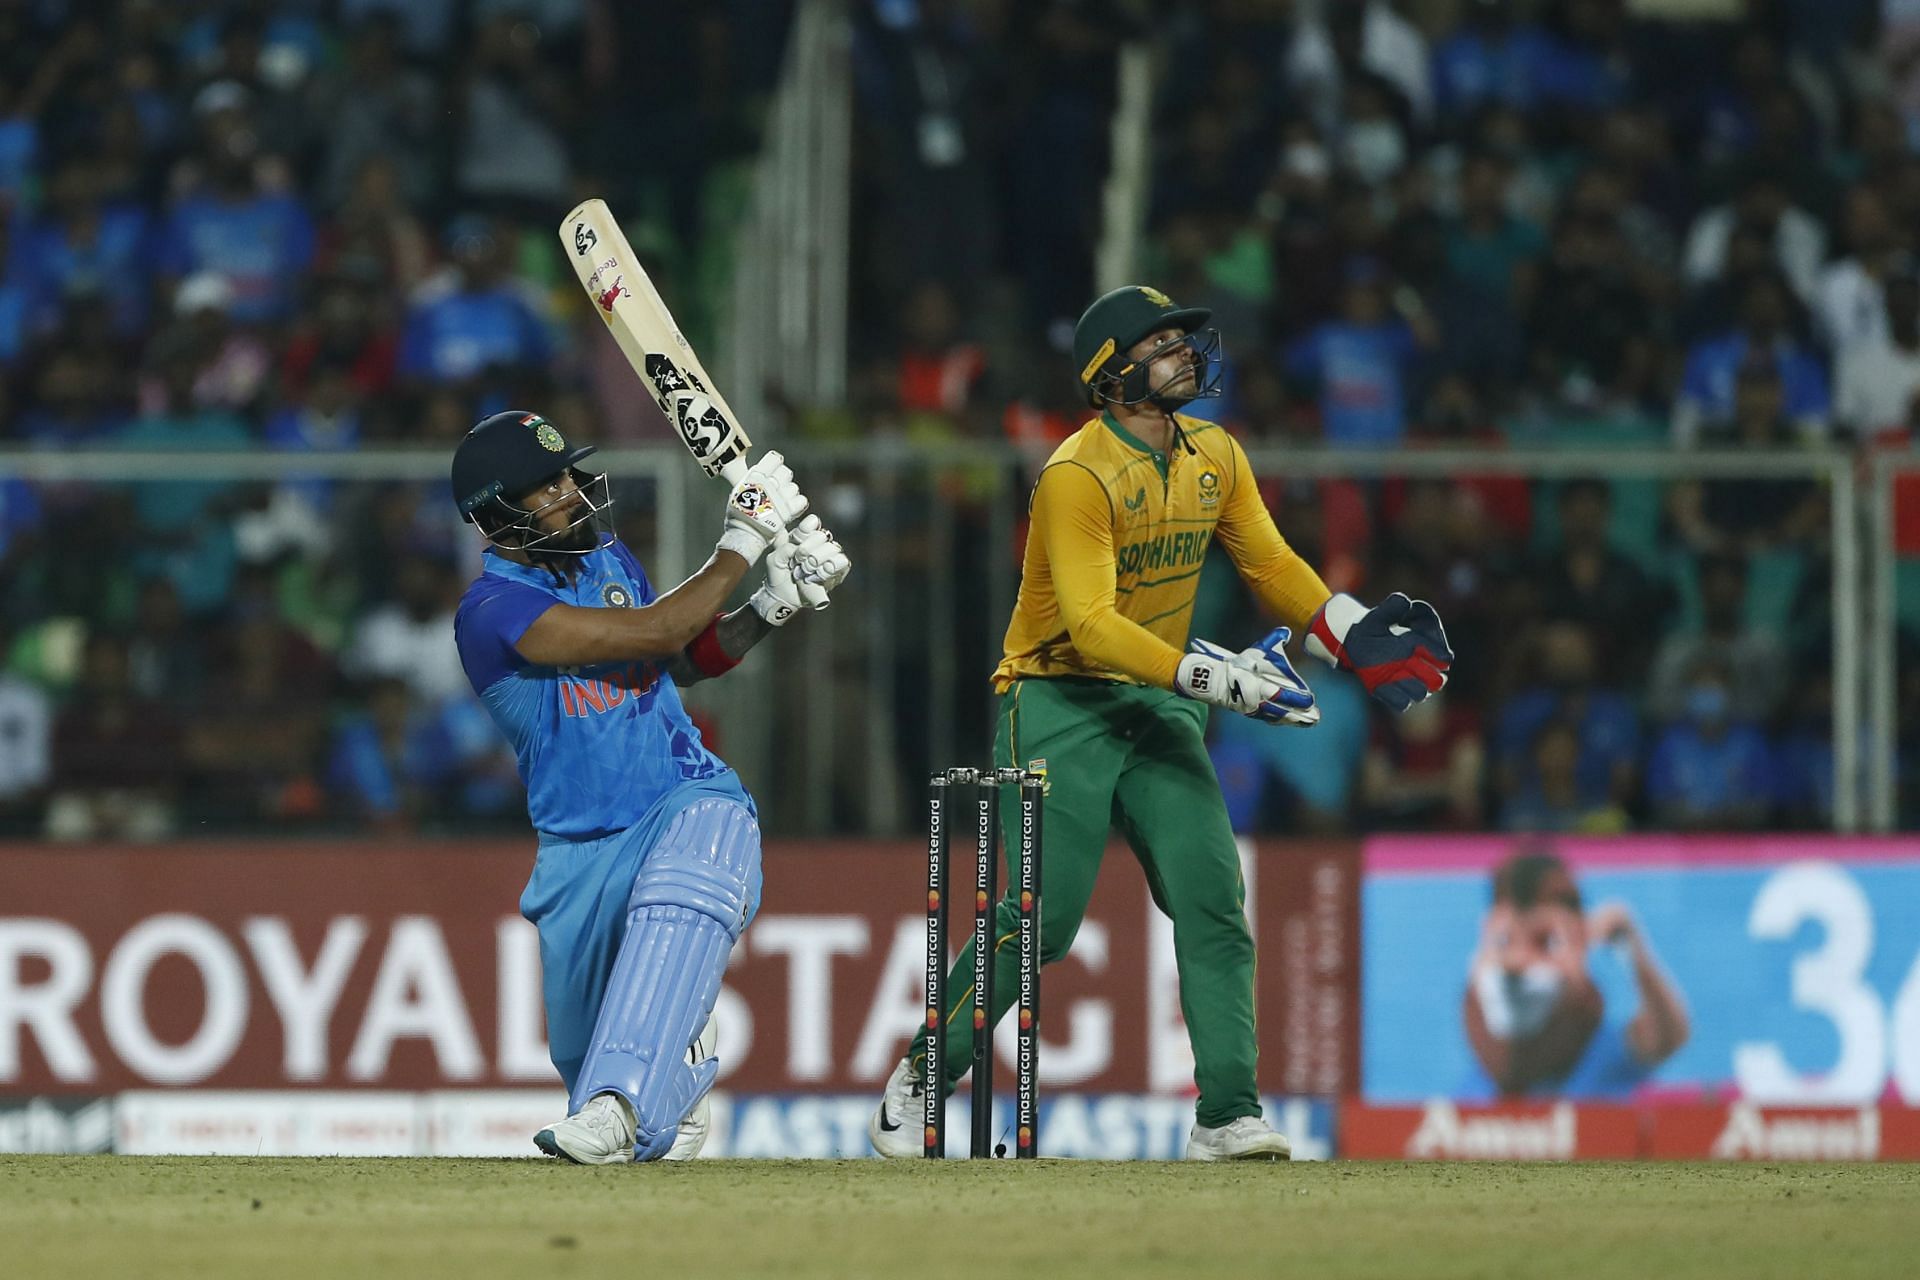 1st T20 International: India vs South Africa